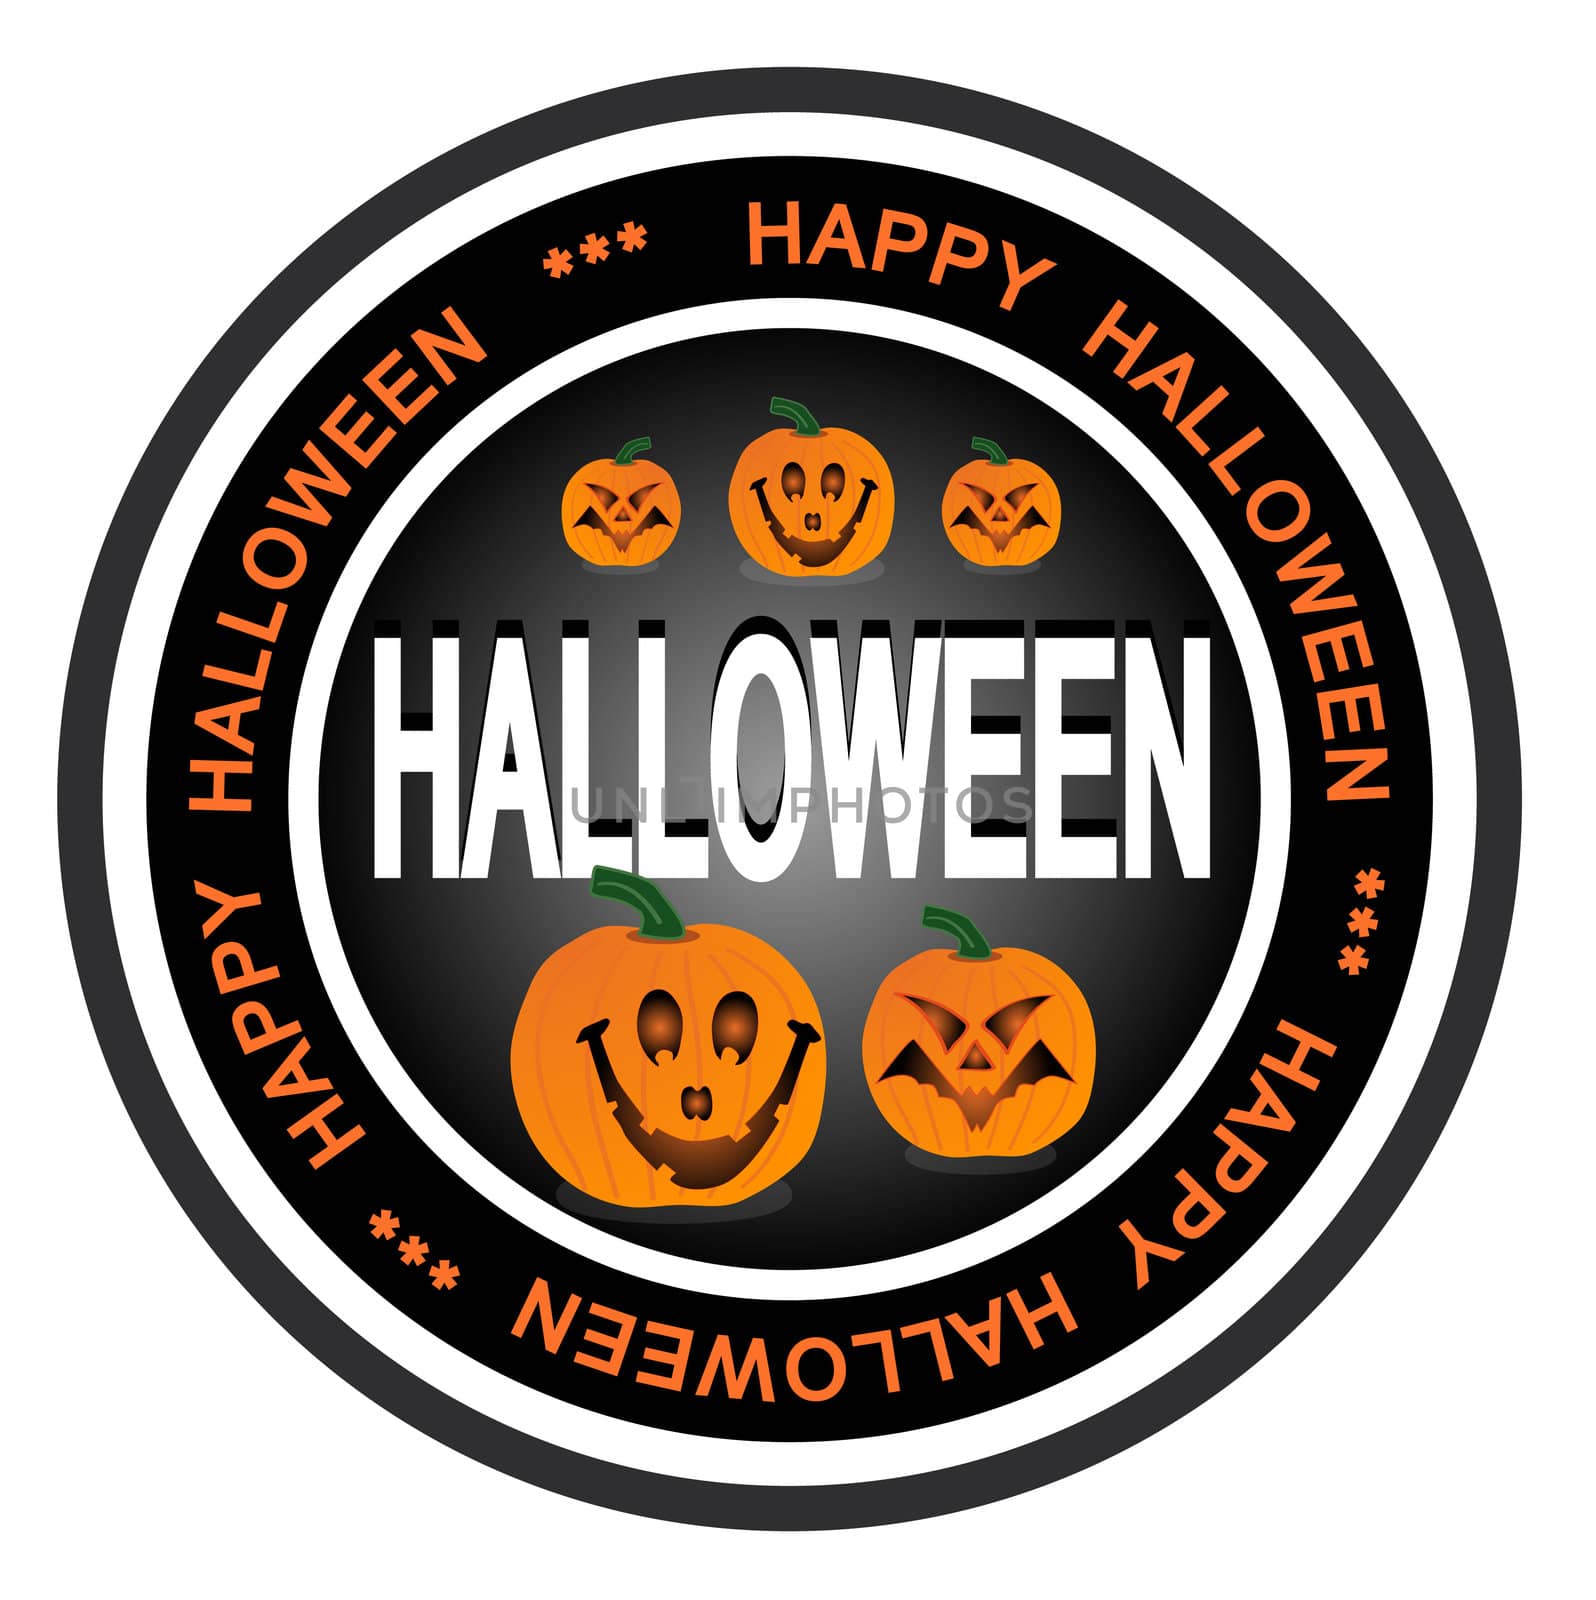 An illustrated badge symbolizing Halloween. All on white background.